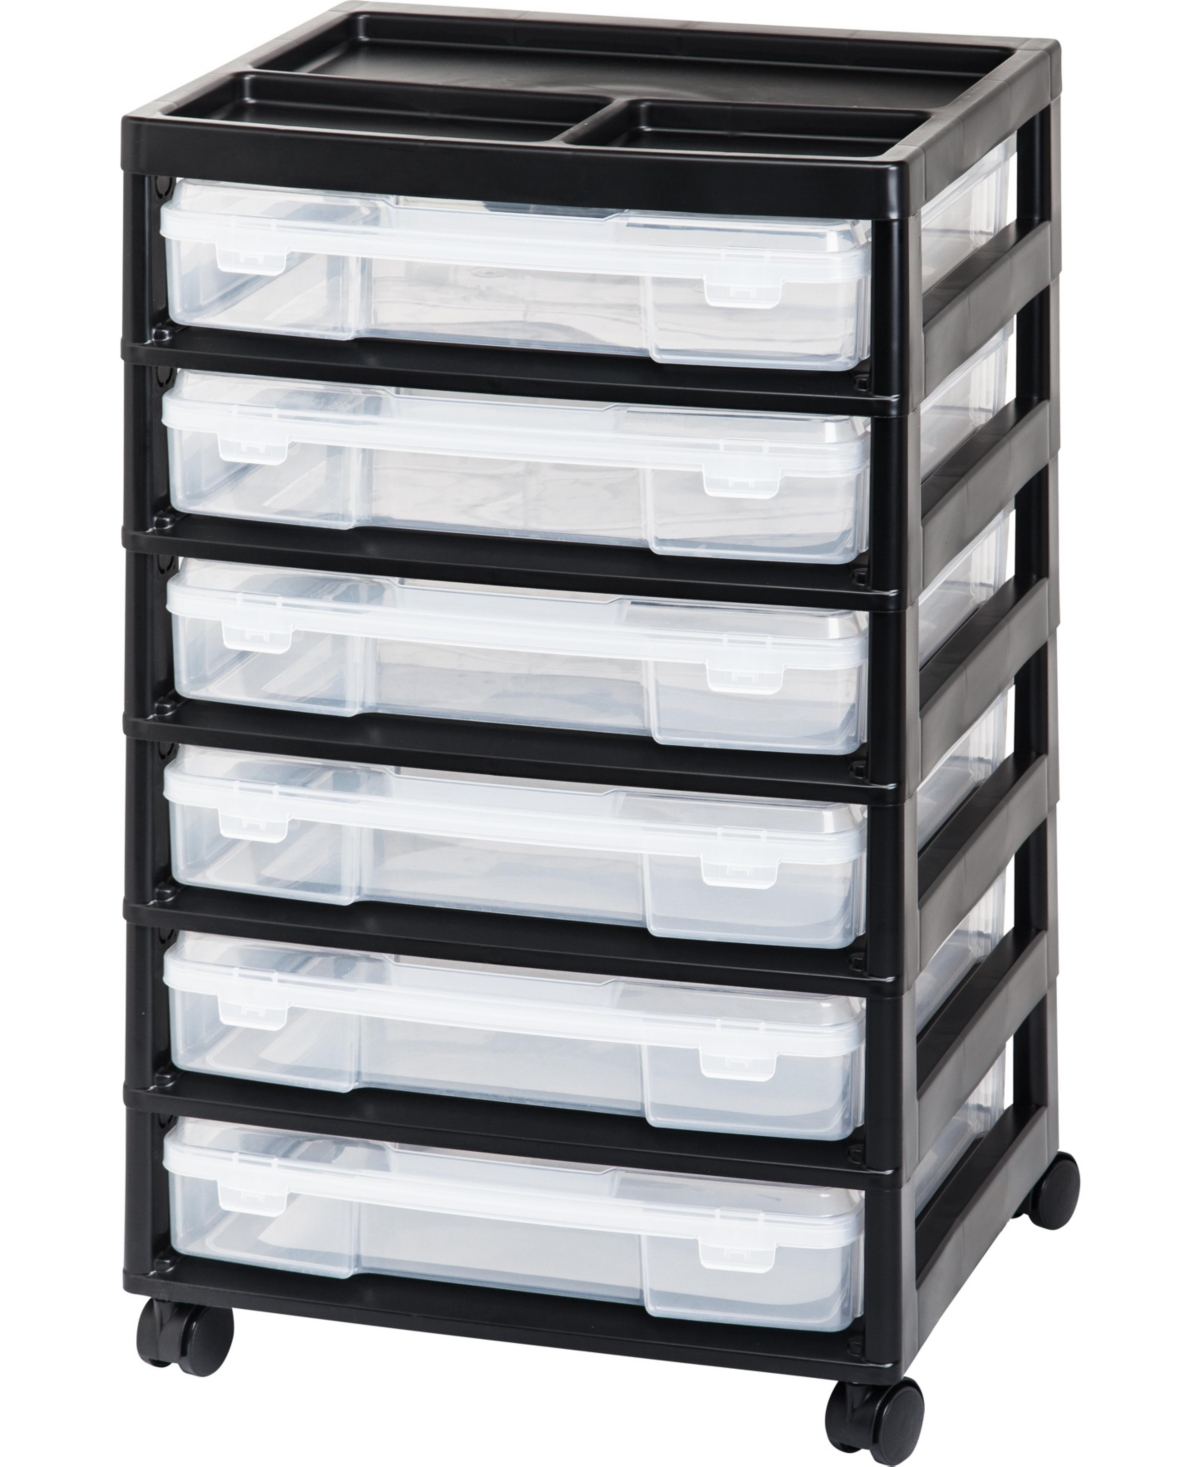 Fits 12" x 12" Paper, 6-Tier Scrapbook Rolling Storage Cart with Organizer Top for Papers Vinyl Tools Office Art and Craft Supplies Yarn Blac